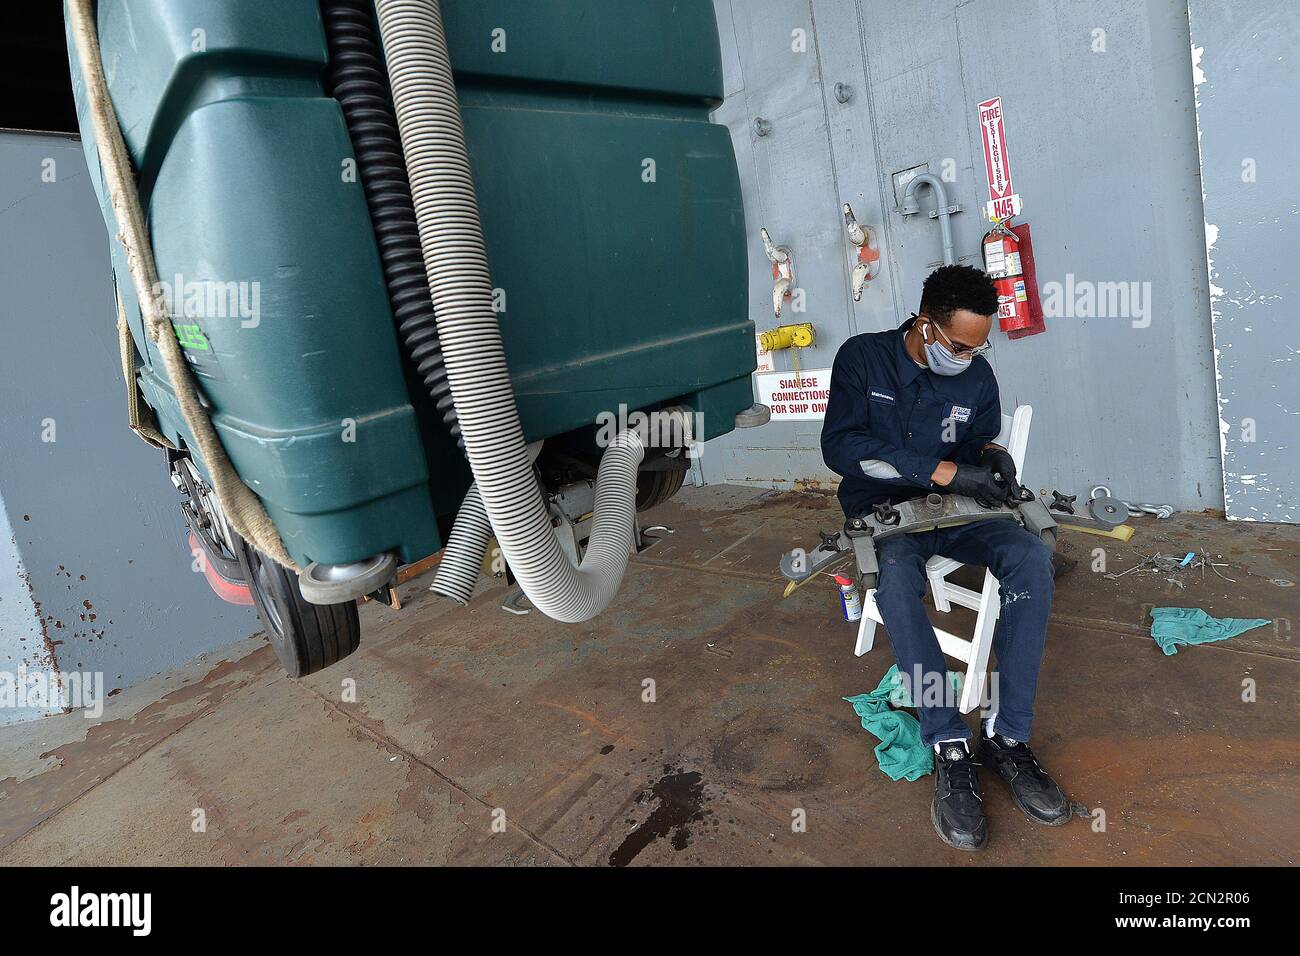 Intrepid Maintenance crew member Jason Gallant works on repairing a floor scrubber on the lower deck of the Intrepid Sea, Air & Space Museum scheduled to reopen (September 25) to the public, in New York, NY, September 17, 2020. More than 200 hand sanitizer dispensers will be set up throughout the exhibits, tickets will be time reserved, one way foot-traffic signs will help visitors navigate the exhibitions which will be cleaned and disinfected every hour; access to the Concord, submarine and food services will remain closed. (Anthony Behar/Sipa USA) Stock Photo